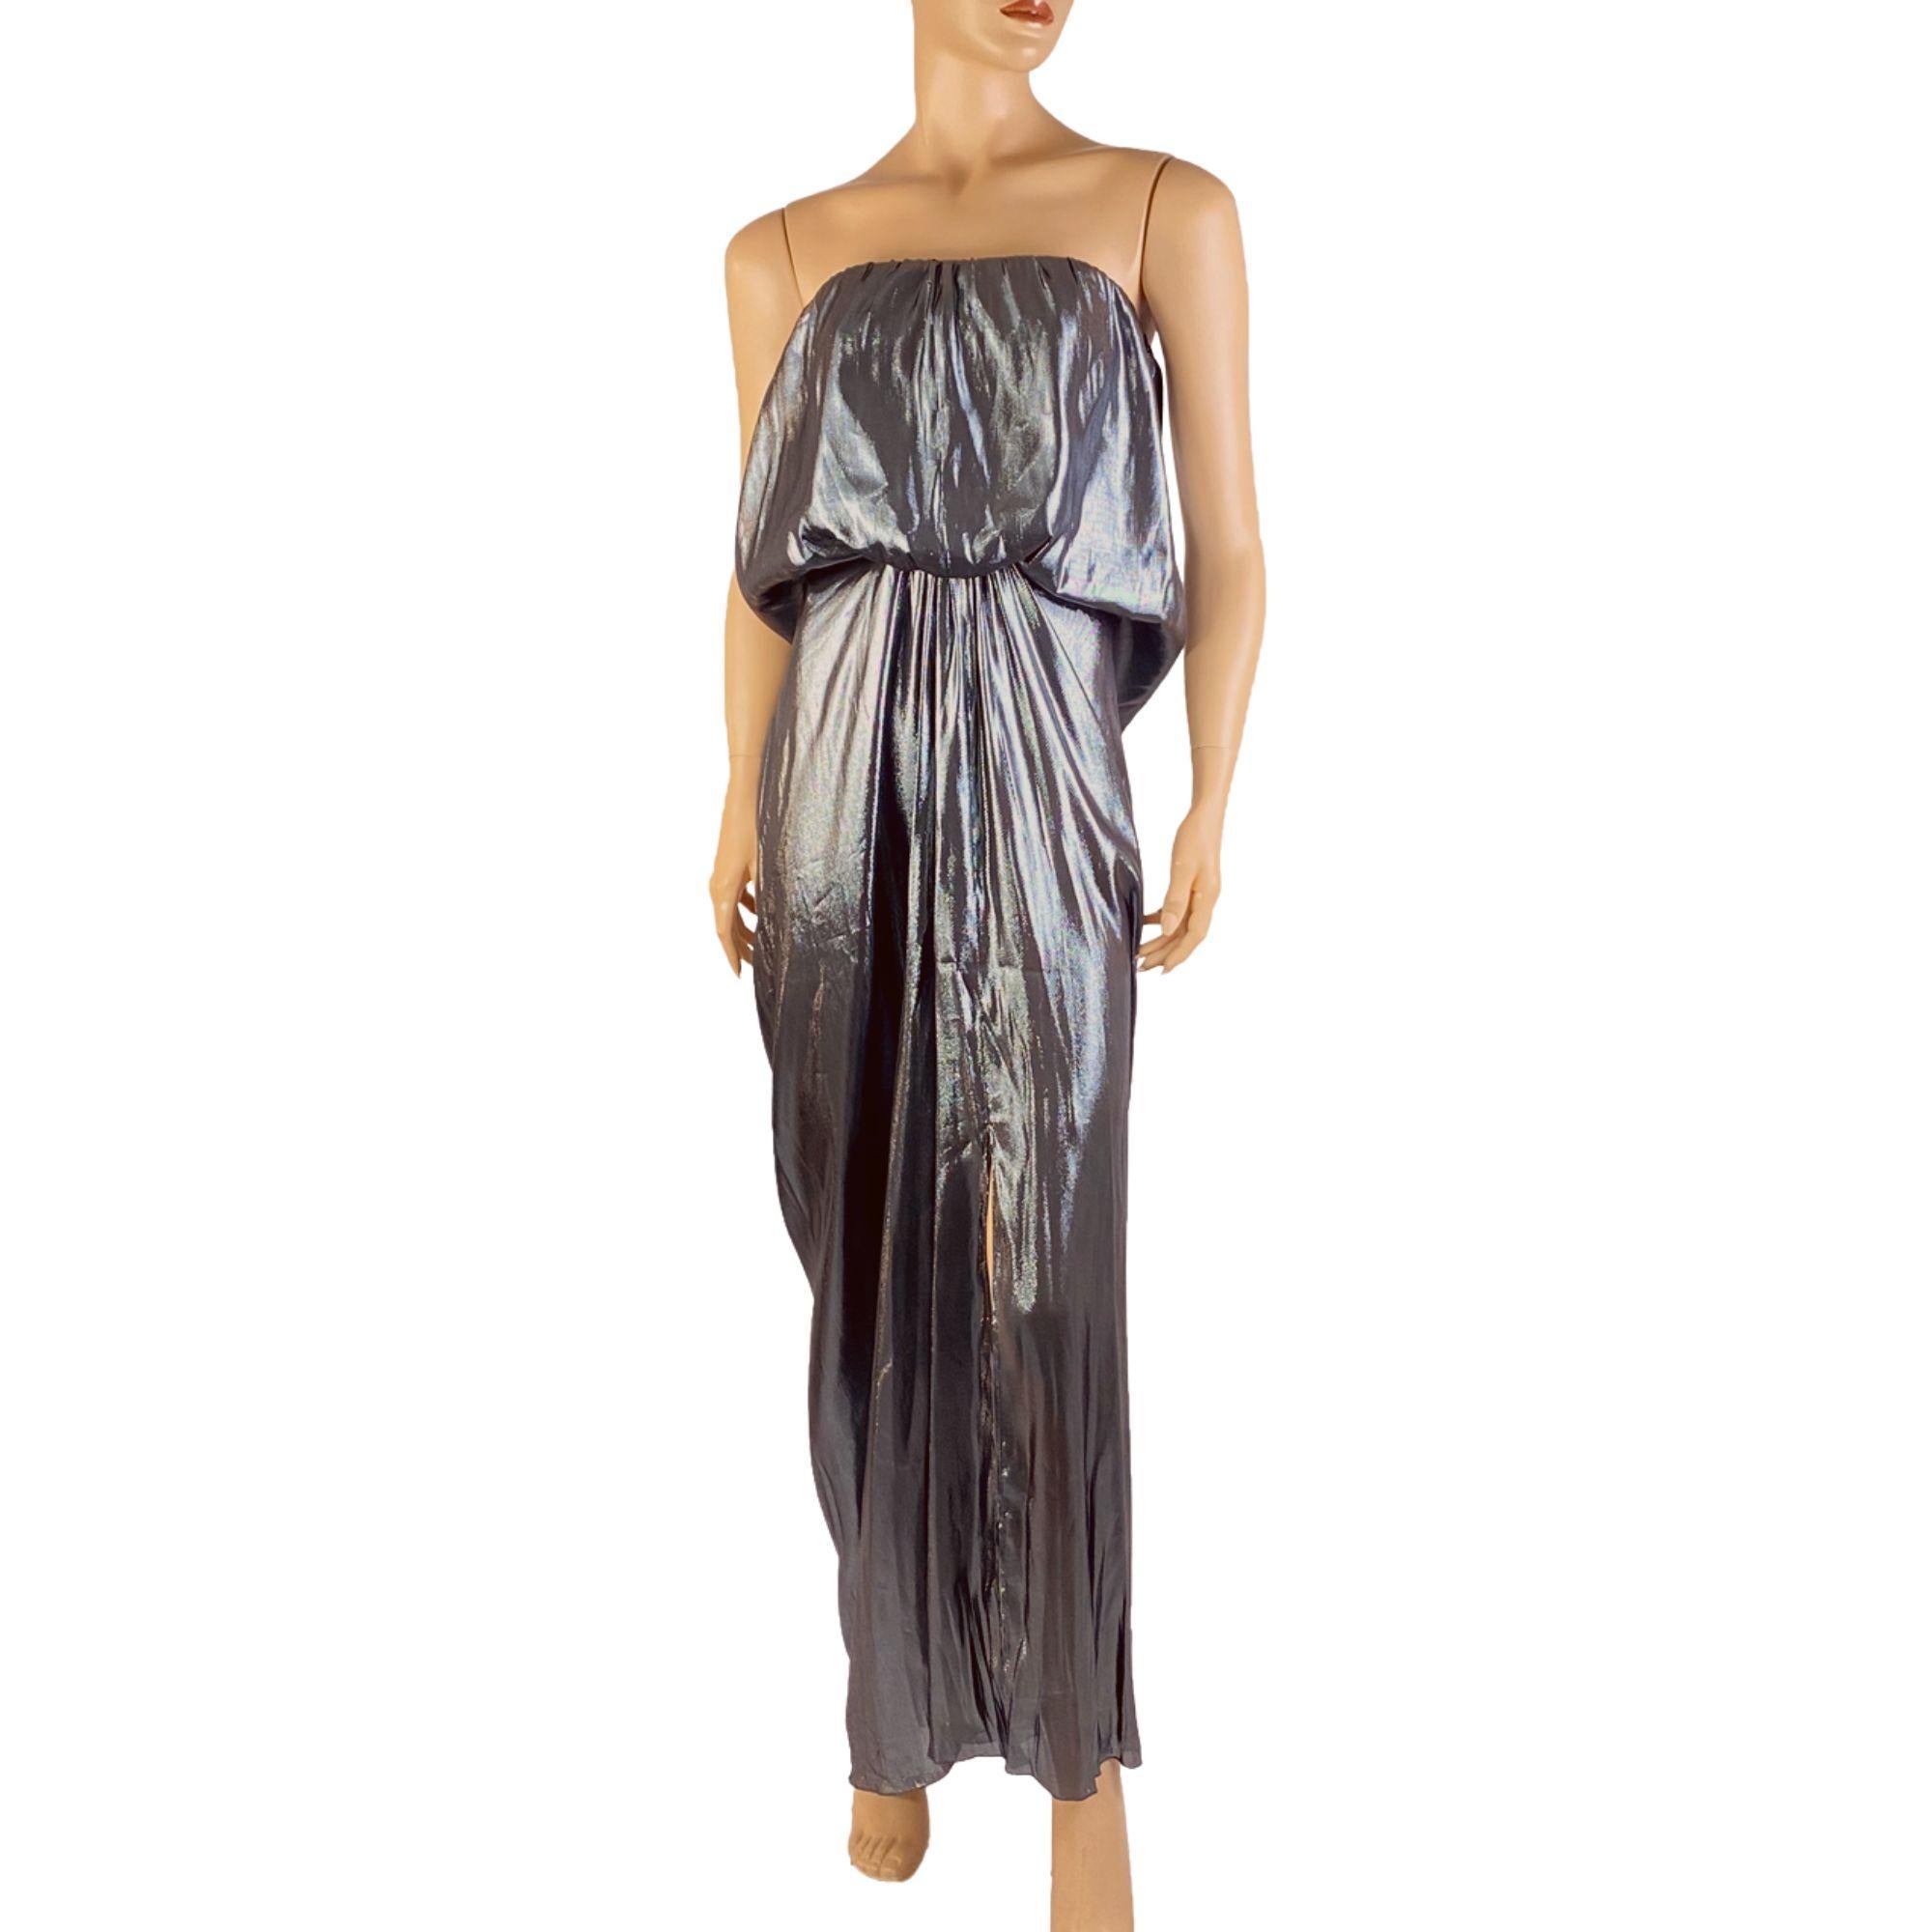 Lanvin strapless draped metallic silver maxi dress. Gathered at the waist to give a beautiful silhouette. Hem is ankle length.

Condition: Good, consistent with a one time wear
Tag Size: FR 40 / UK 10 / EU 38